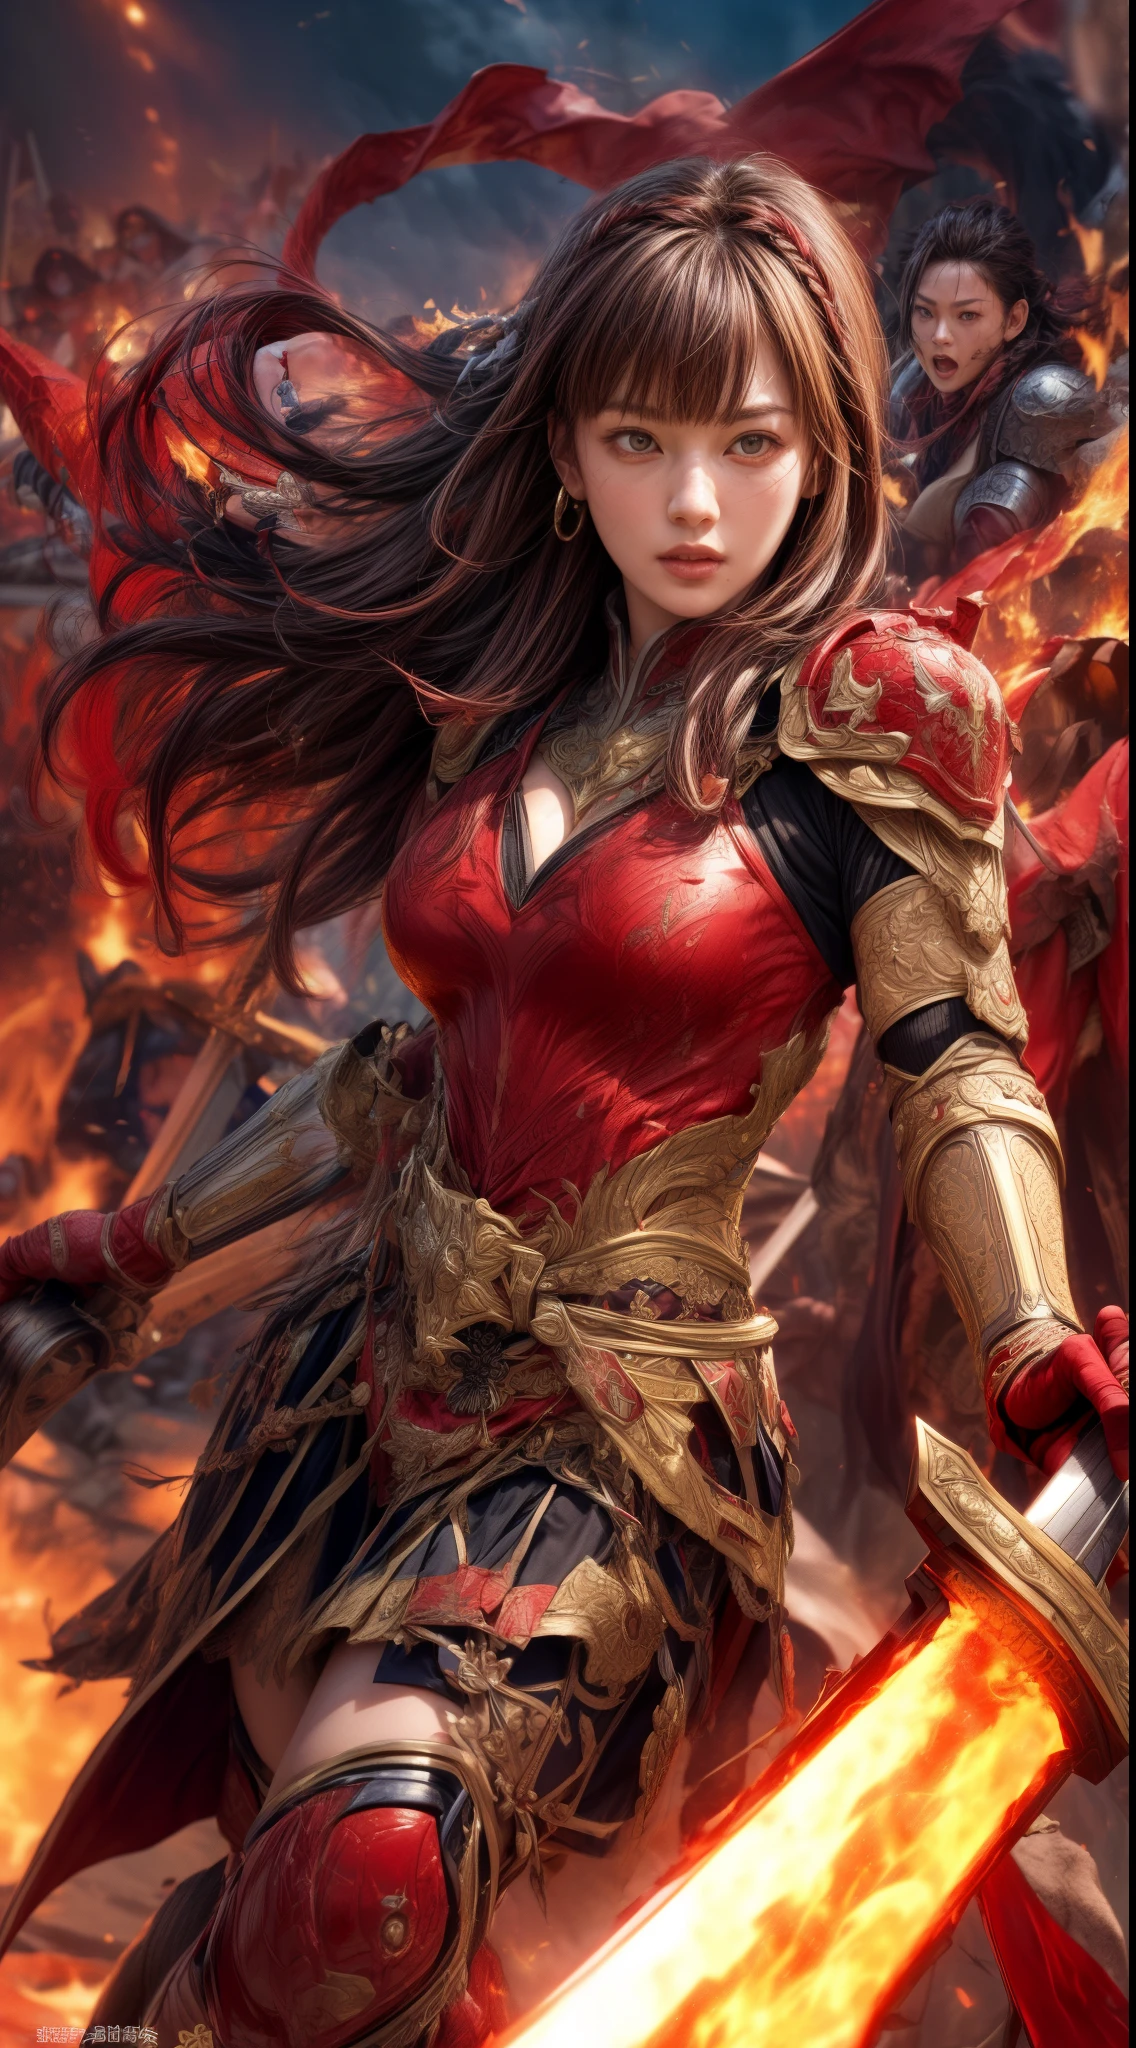 Very beautiful woman、Slender women、(Detailed face)、Realistic Skin、((Knight of Fire)), (((Red Armor:1.25)))、((((Black armor with very fine and intricate decoration))))、((Delicate photo))，(Girl Astepeace RAW Photo Details:1.25), (highest quality:1.6), (超A high resolution:1.5), (Realistic:1.75), 8K resolution, Canon EOS R5, 50mm, Absurd, Ultra-detailed,Cinema Lighting,Battlefields of Medieval Europe、((battle))、RPG World、Final Fantasy、(((Embellished skirt)))、Thigh-high socks、Shin Guards、night、((too long bangs))、((One long thick dark red hair braid))、Get six-pack、Torn Cloak、Beautiful Armor、(((Giant Sword)))、In combat、The wind is blowing、(((Inferno filling the entire area)))、(((Leading a large group of red knights)))、(((Knight Commander)))、Armor with a Phoenix motif、Old scar on right cheek:1.2、((Fire blaze))